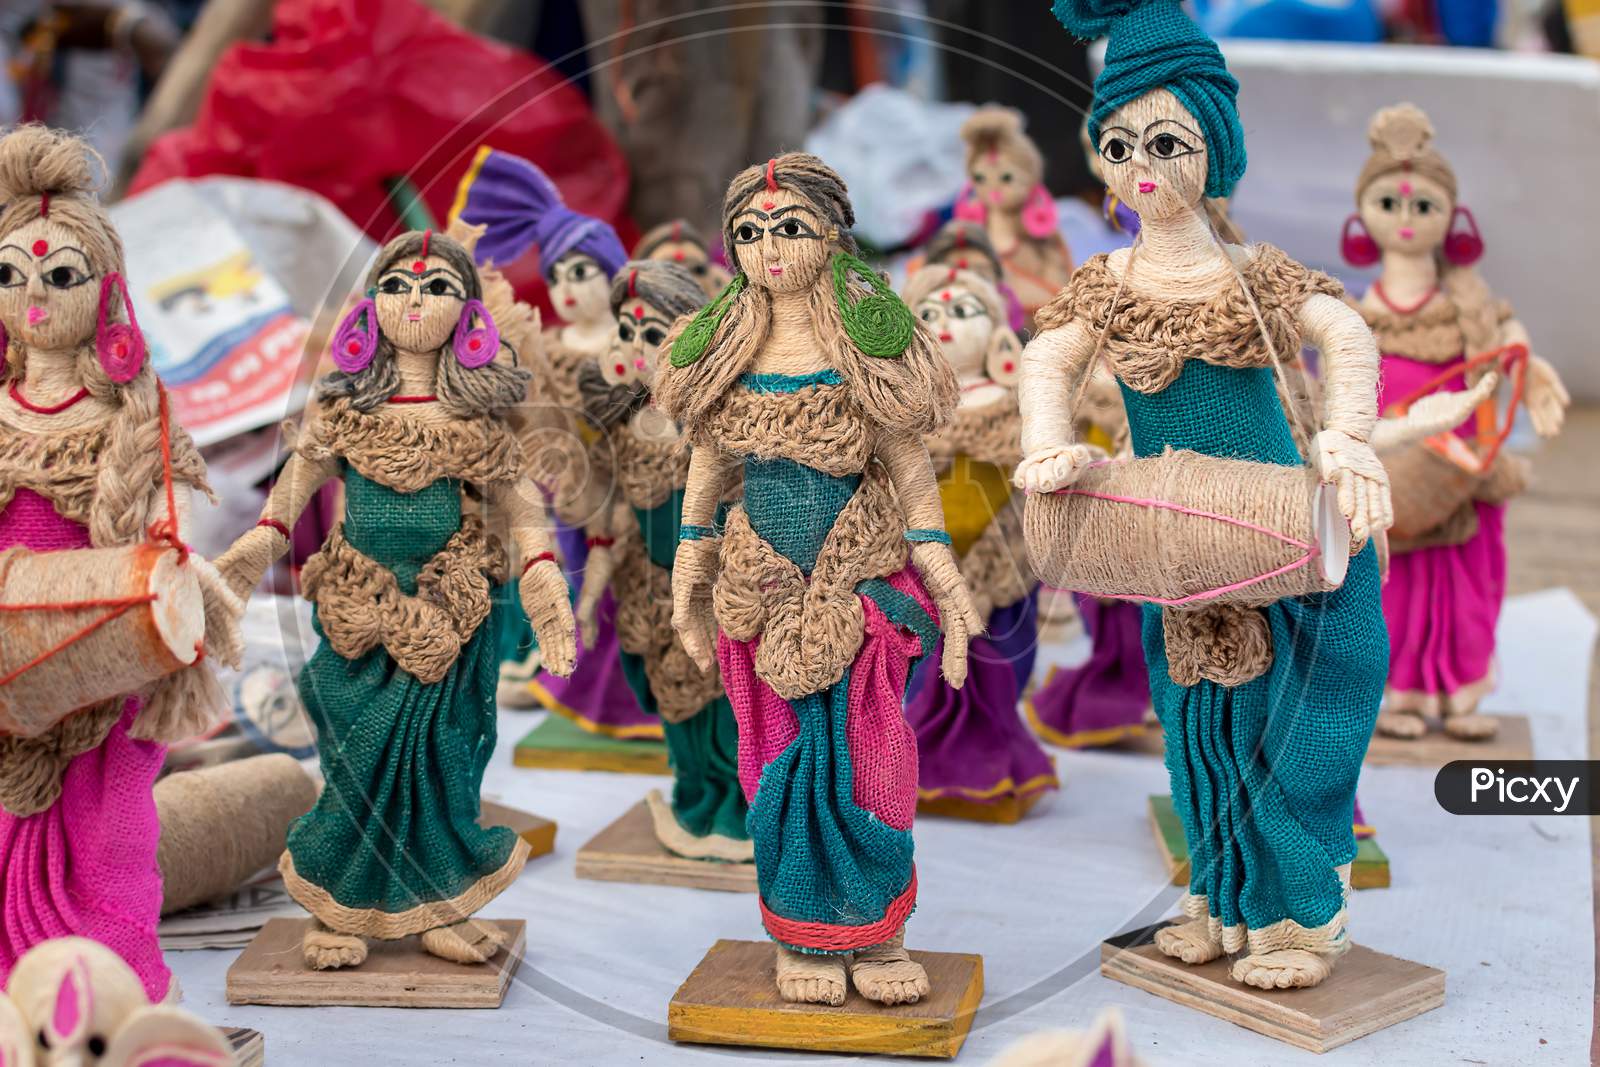 Handmade Puppet Models Of Musicians And Dancers With Traditional Costumes Made Of Jute Isolated On Blurred Background Is Displayed In A Street Shop For Sale. Indian Handicraft And Art